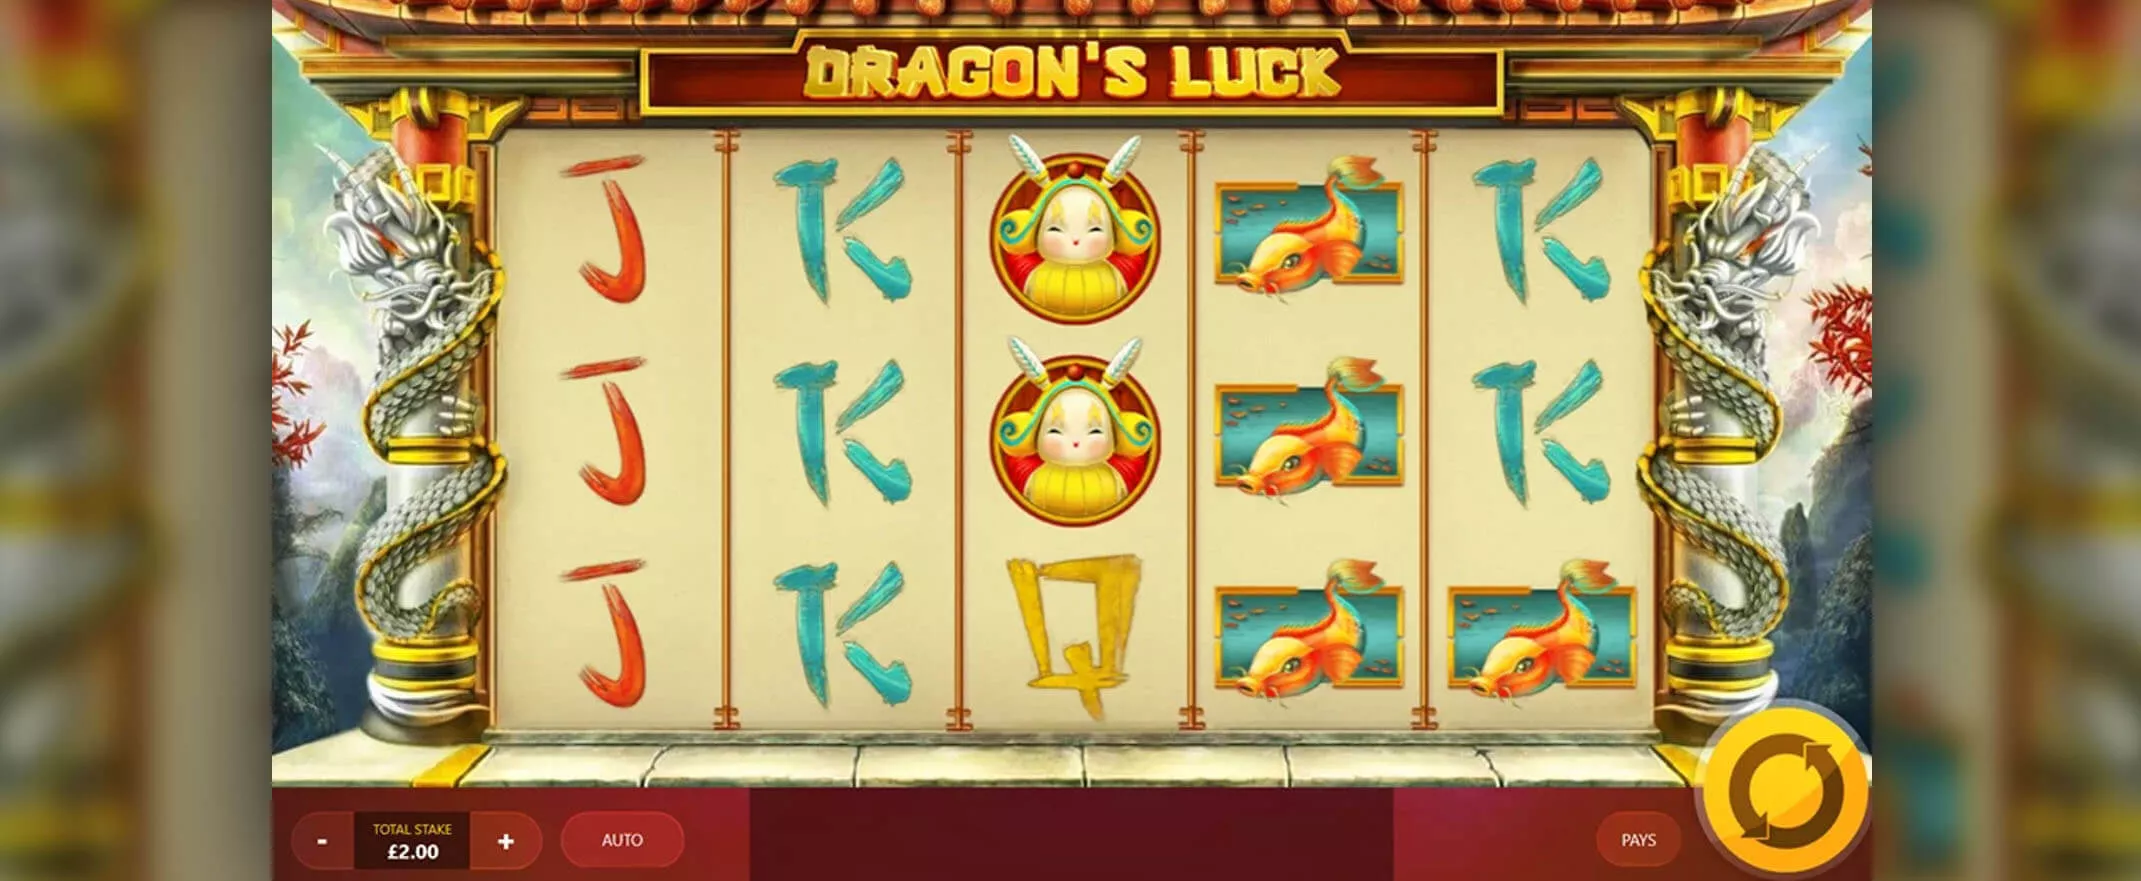 Dragon’s Luck Megaways slot by Red Tiger